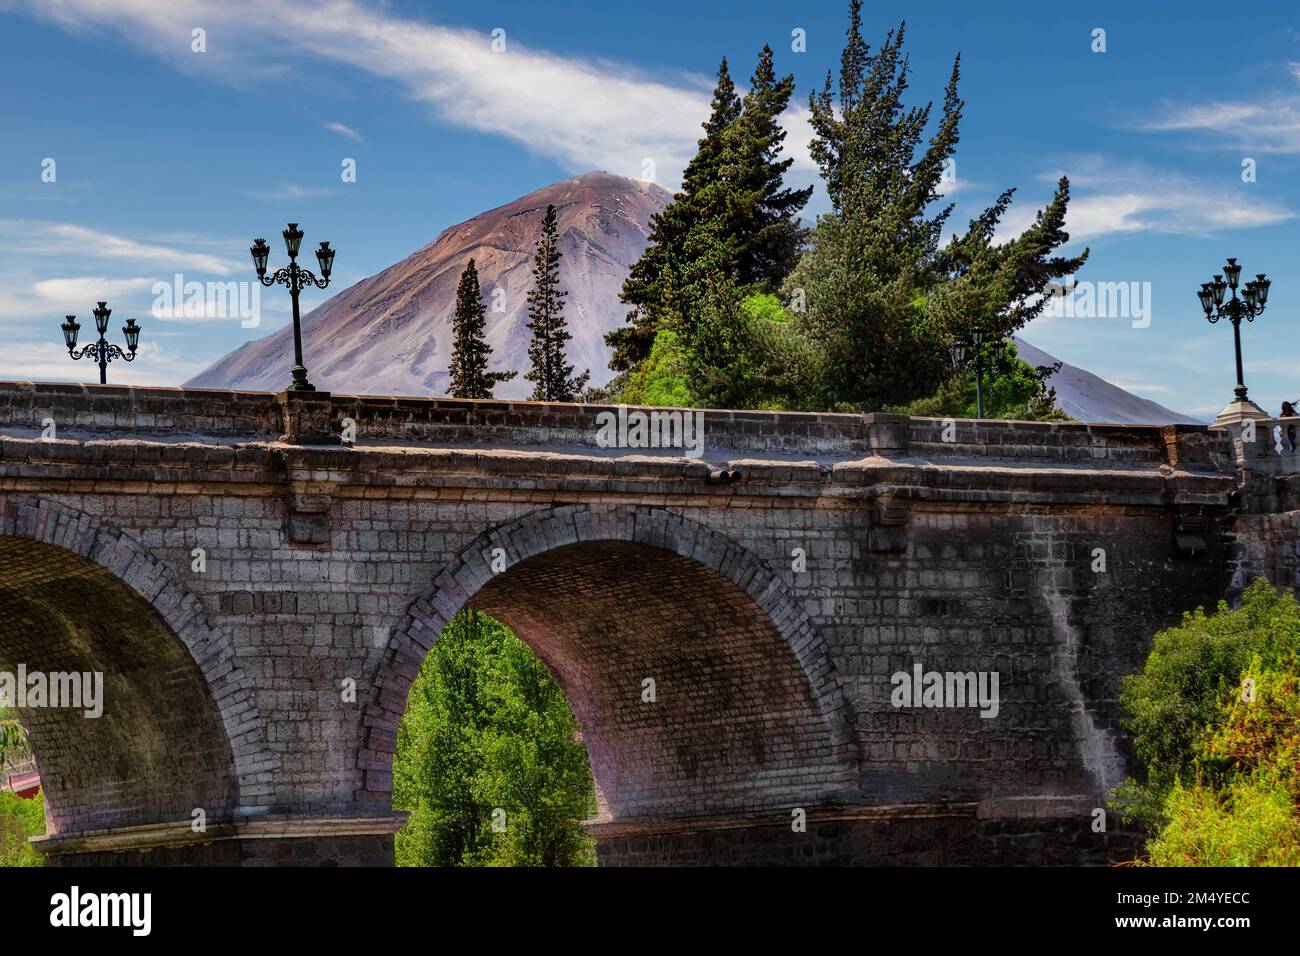 The famous Puente Grau Bridge in Arequipa in Peru with the snowless Misti Volcano in the background. Stock Photo